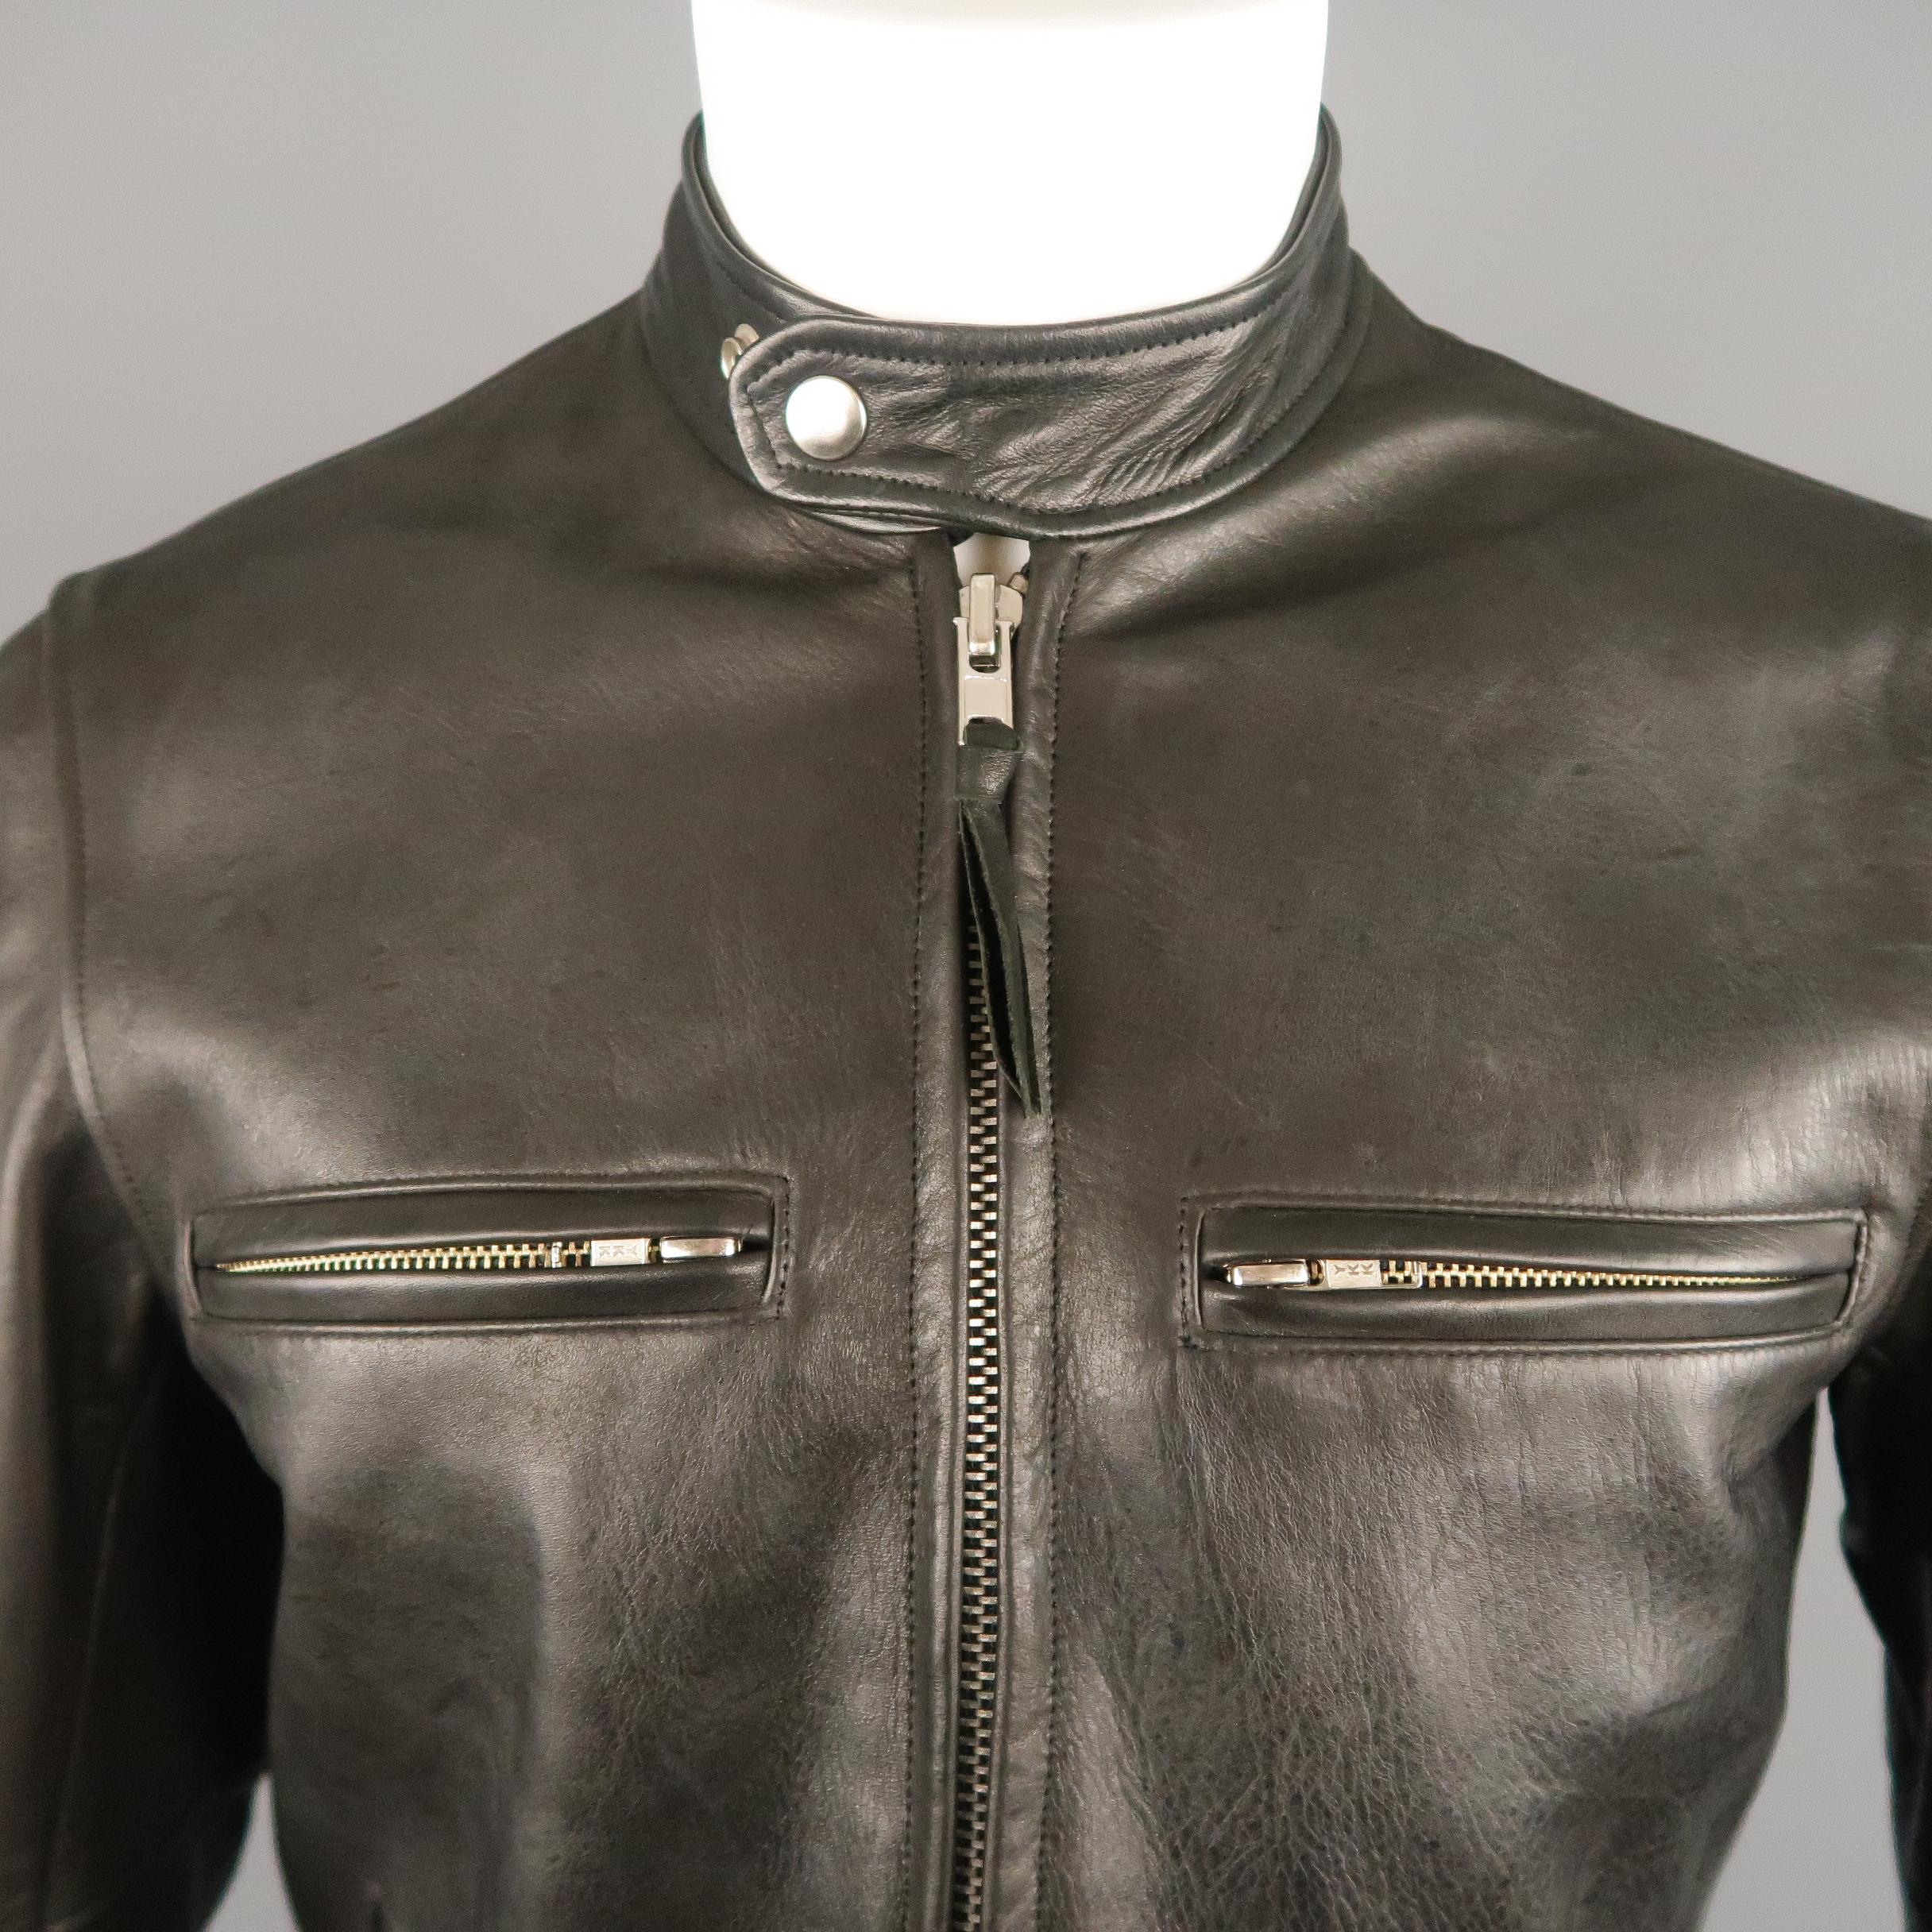 EPAULET motorcycle jacket comes in Horween horsehide leather snap tab band collar, double zip front, zip chest pockets, zip cuffs, slanted slit pockets, and plaid liner. Minor wear throughout leather. Made in USA.
 
Very Good Pre-Owned